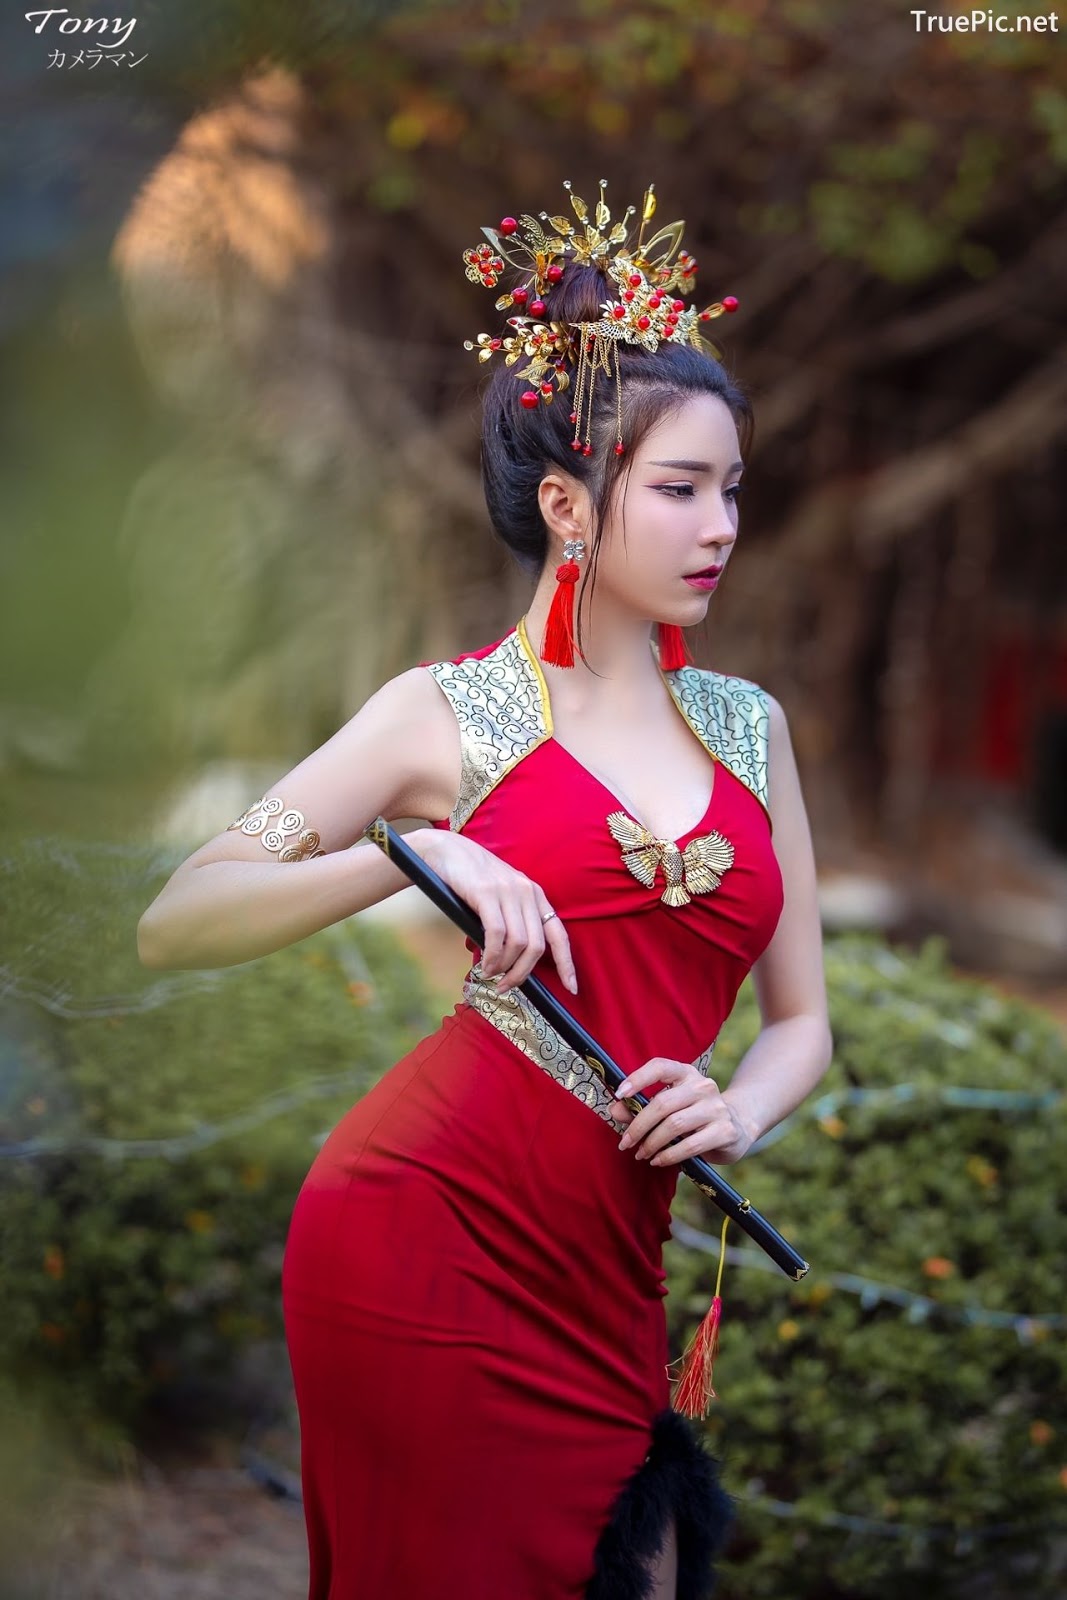 Image-Thailand-Hot-Model-Janet-Kanokwan-Saesim-Sexy-Chinese-Girl-Red-Dress-Traditional-TruePic.net- Picture-26